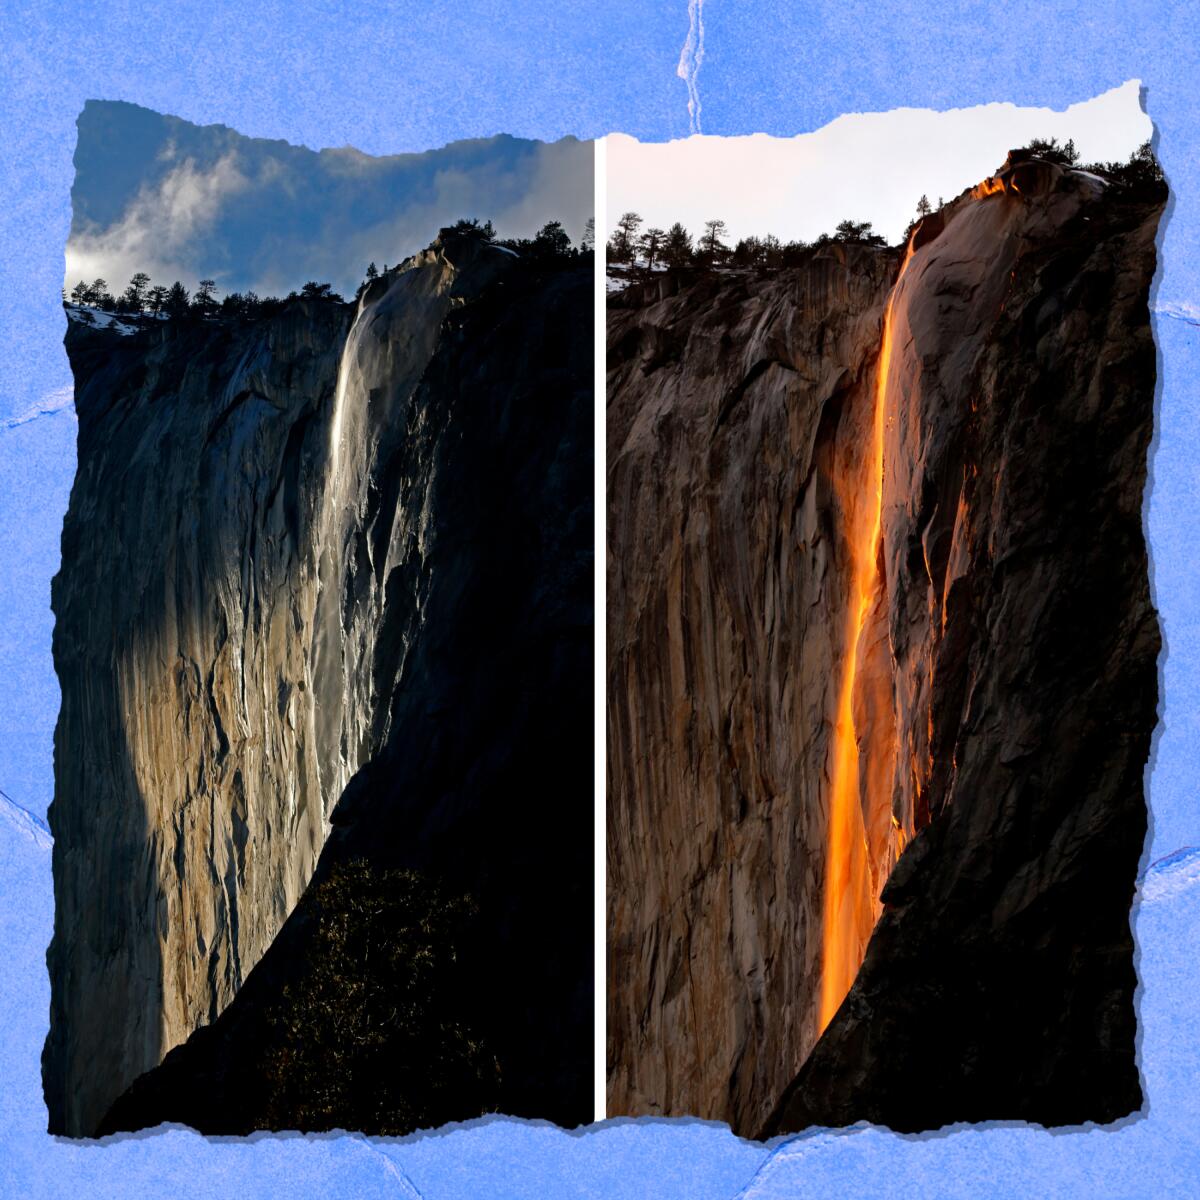 Side by side photos of a waterfall on a sheer cliff. In one the water looks red.